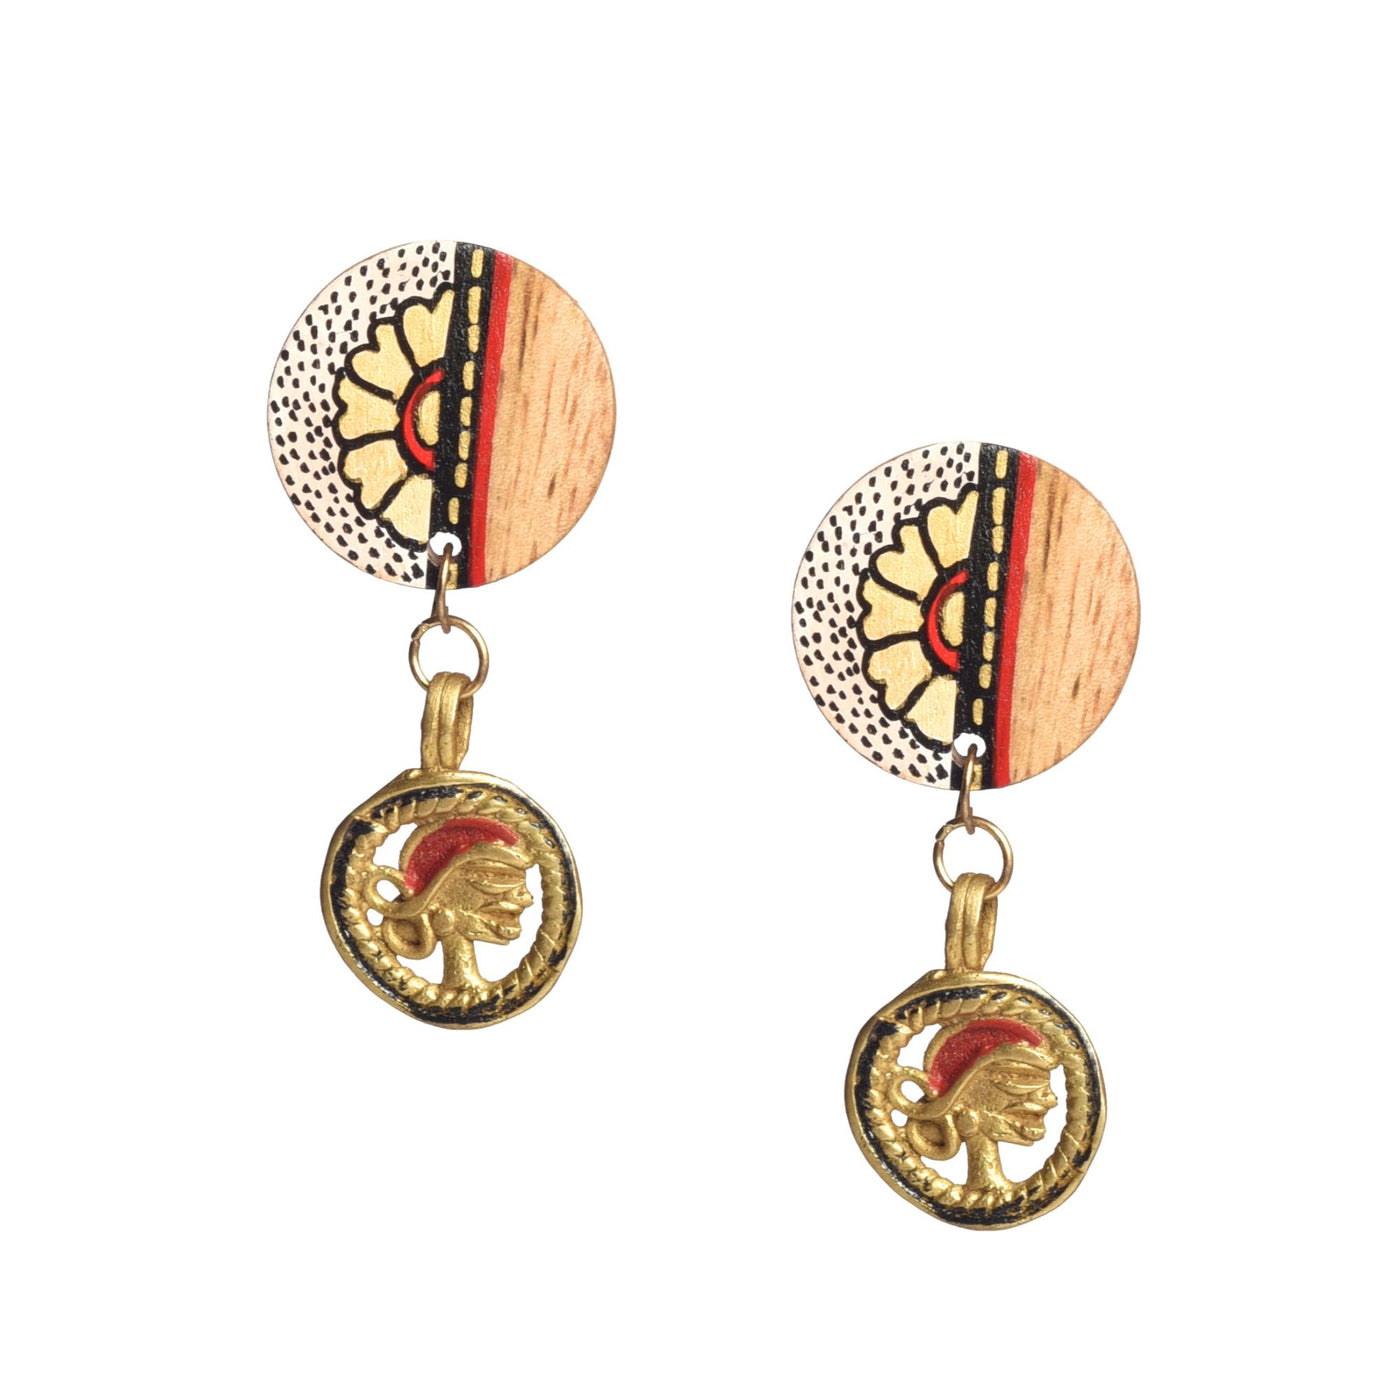 The Star Handcrafted Tribal Earrings - Fashion & Lifestyle - 2